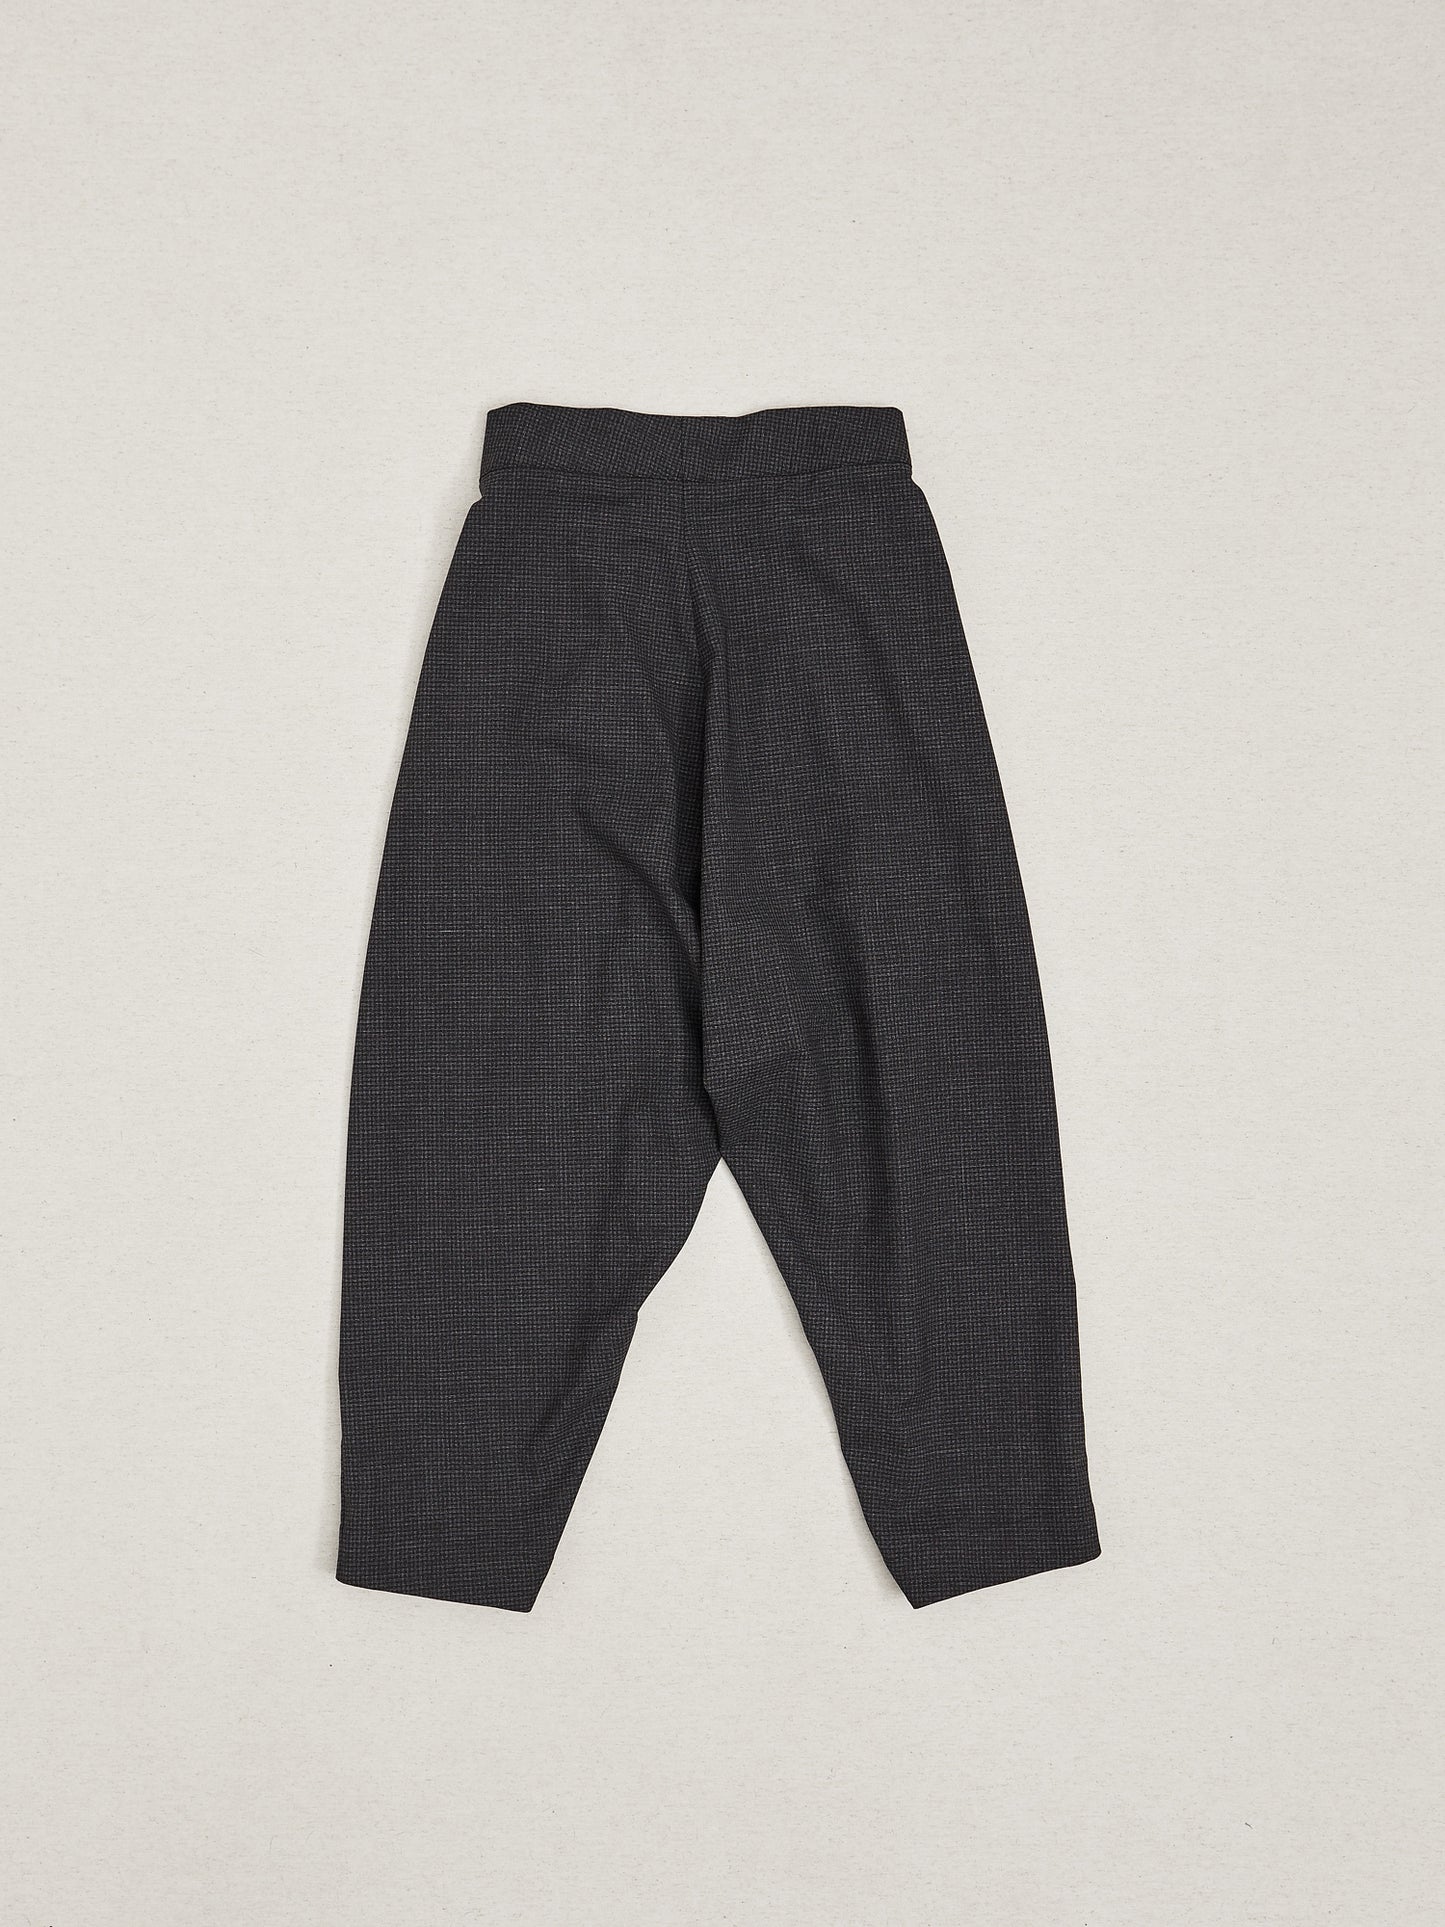 Japanese wool trousers